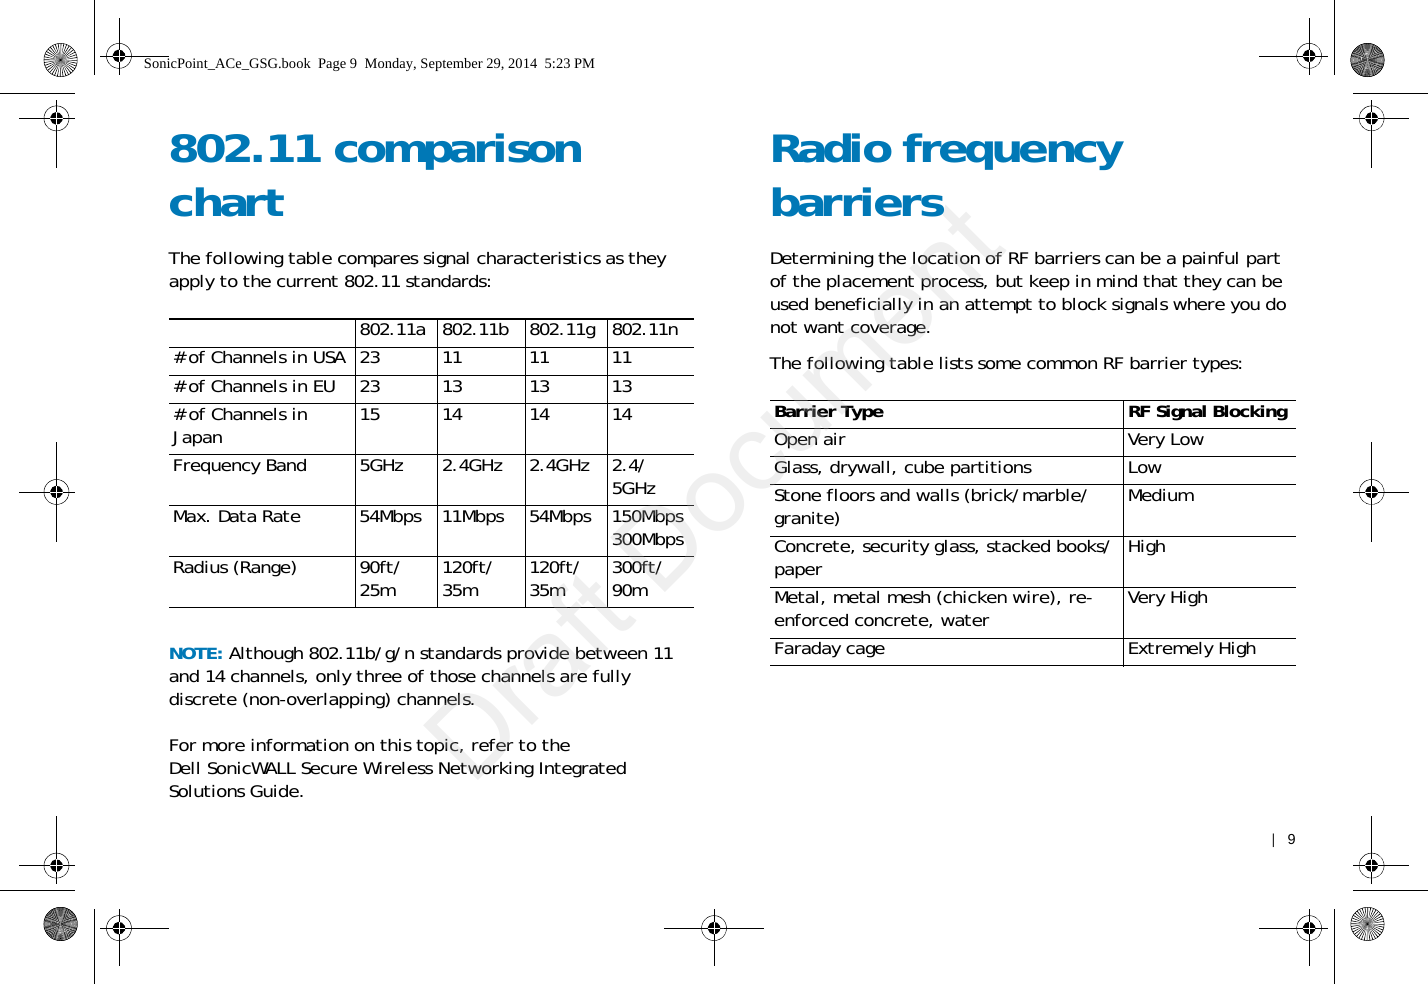    |   9802.11 comparison chartThe following table compares signal characteristics as they apply to the current 802.11 standards:NOTE: Although 802.11b/g/n standards provide between 11 and 14 channels, only three of those channels are fully discrete (non-overlapping) channels.For more information on this topic, refer to the Dell SonicWALL Secure Wireless Networking Integrated Solutions Guide.Radio frequency barriersDetermining the location of RF barriers can be a painful part of the placement process, but keep in mind that they can be used beneficially in an attempt to block signals where you do not want coverage. The following table lists some common RF barrier types:802.11a 802.11b 802.11g 802.11n# of Channels in USA2311 1111# of Channels in EU 23 13 13 13# of Channels in Japan 15 14 14 14Frequency Band 5GHz 2.4GHz 2.4GHz 2.4/5GHzMax. Data Rate 54Mbps 11Mbps 54Mbps 150Mbps300MbpsRadius (Range) 90ft/25m 120ft/35m 120ft/35m 300ft/90mBarrier Type RF Signal BlockingOpen air Very LowGlass, drywall, cube partitions LowStone floors and walls (brick/marble/granite) MediumConcrete, security glass, stacked books/paper HighMetal, metal mesh (chicken wire), re-enforced concrete, water Very HighFaraday cage Extremely HighSonicPoint_ACe_GSG.book  Page 9  Monday, September 29, 2014  5:23 PMDraft Document